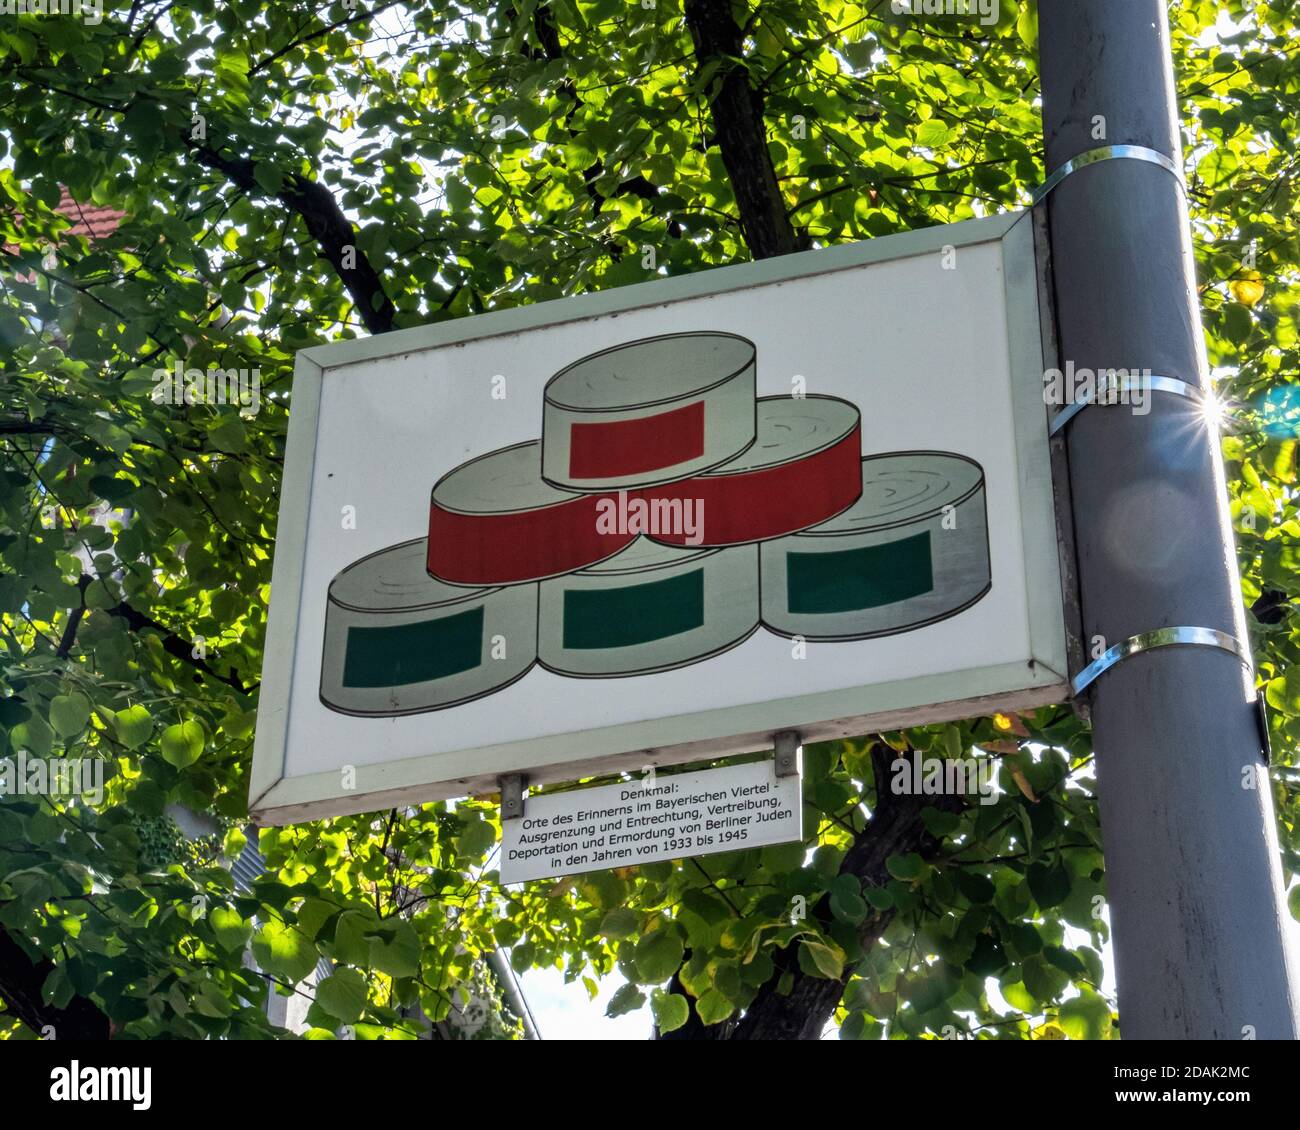 Berlin Schöneberg, Bavarian Quarter. Places of Remembrance memorial, One of 80 double-sided signs on lampposts depicting anti-Jewish Nazi rules.Artwor Stock Photo